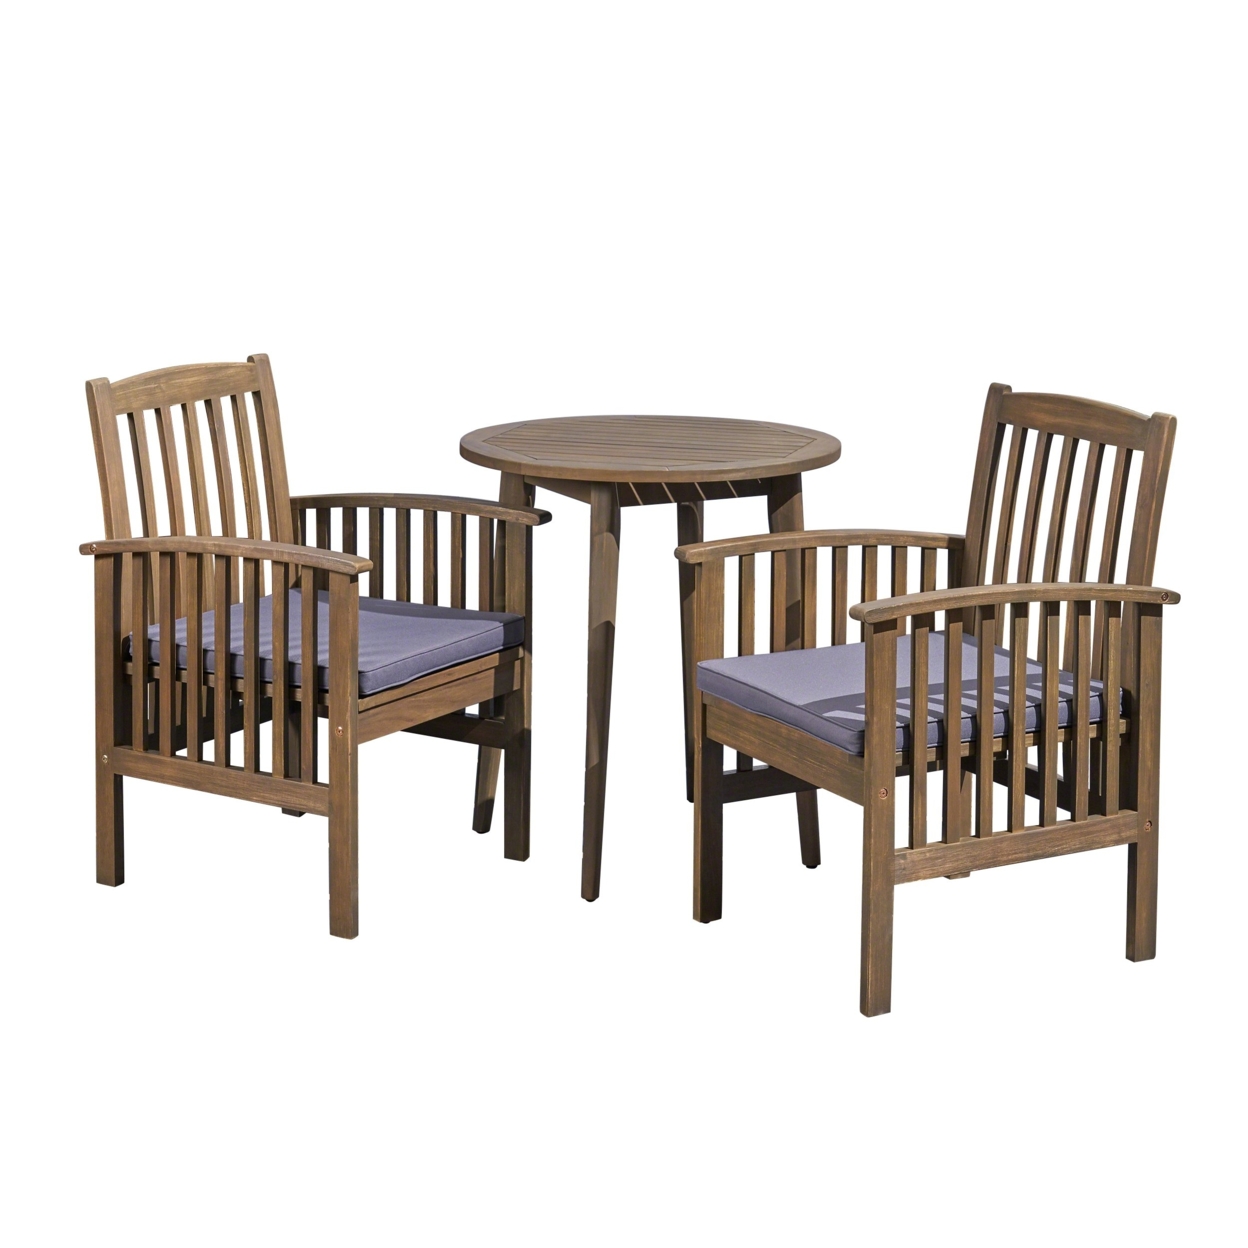 Phoenix Outdoor Acacia 2-Seater Bistro Set With Cushions And 28 Round Table With Straight Legs - Gray Finish + Cream